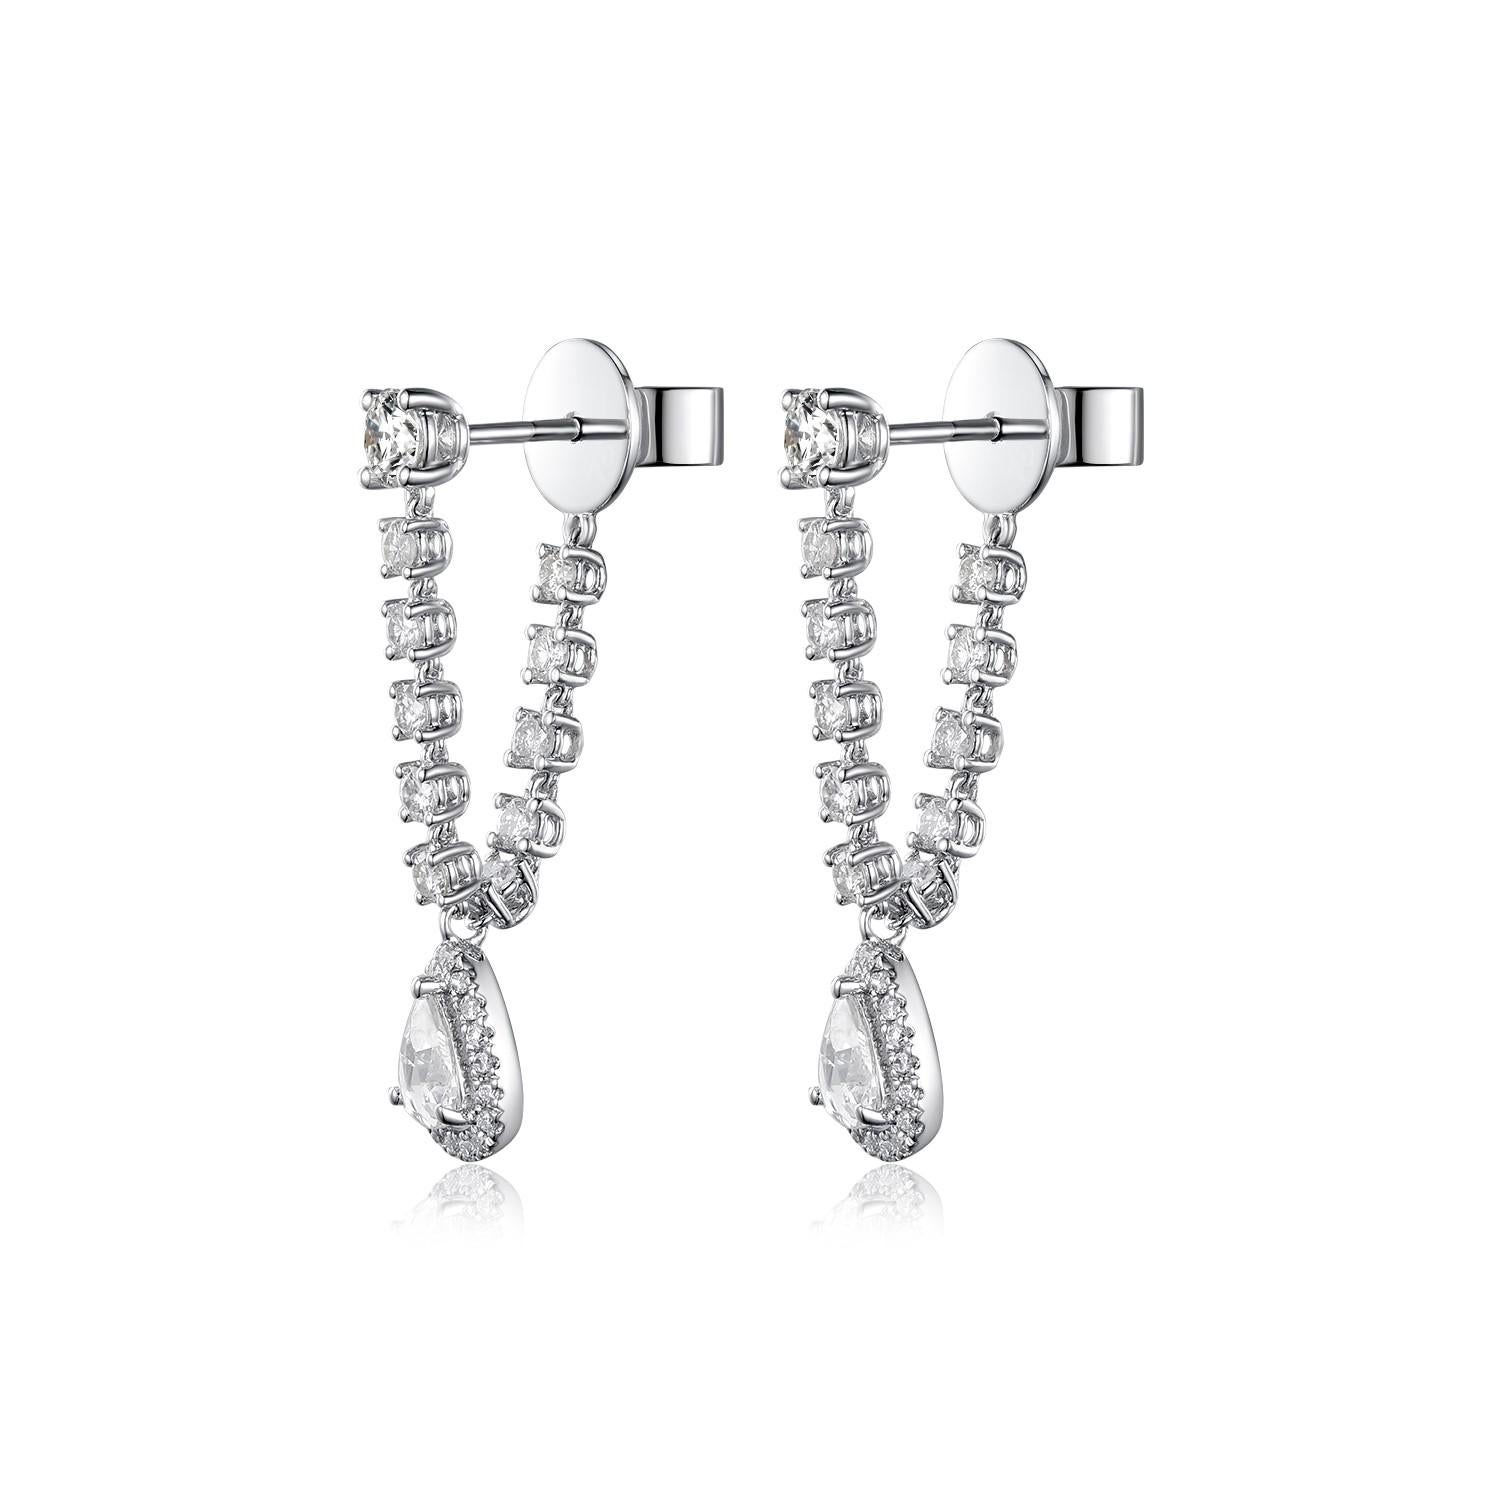 Introducing a pair of stunningly crafted drop earrings, a harmonious blend of classic elegance and modern sophistication. These earrings are fashioned from the finest 18K white gold, known for its high polish and enduring quality.

Each earring